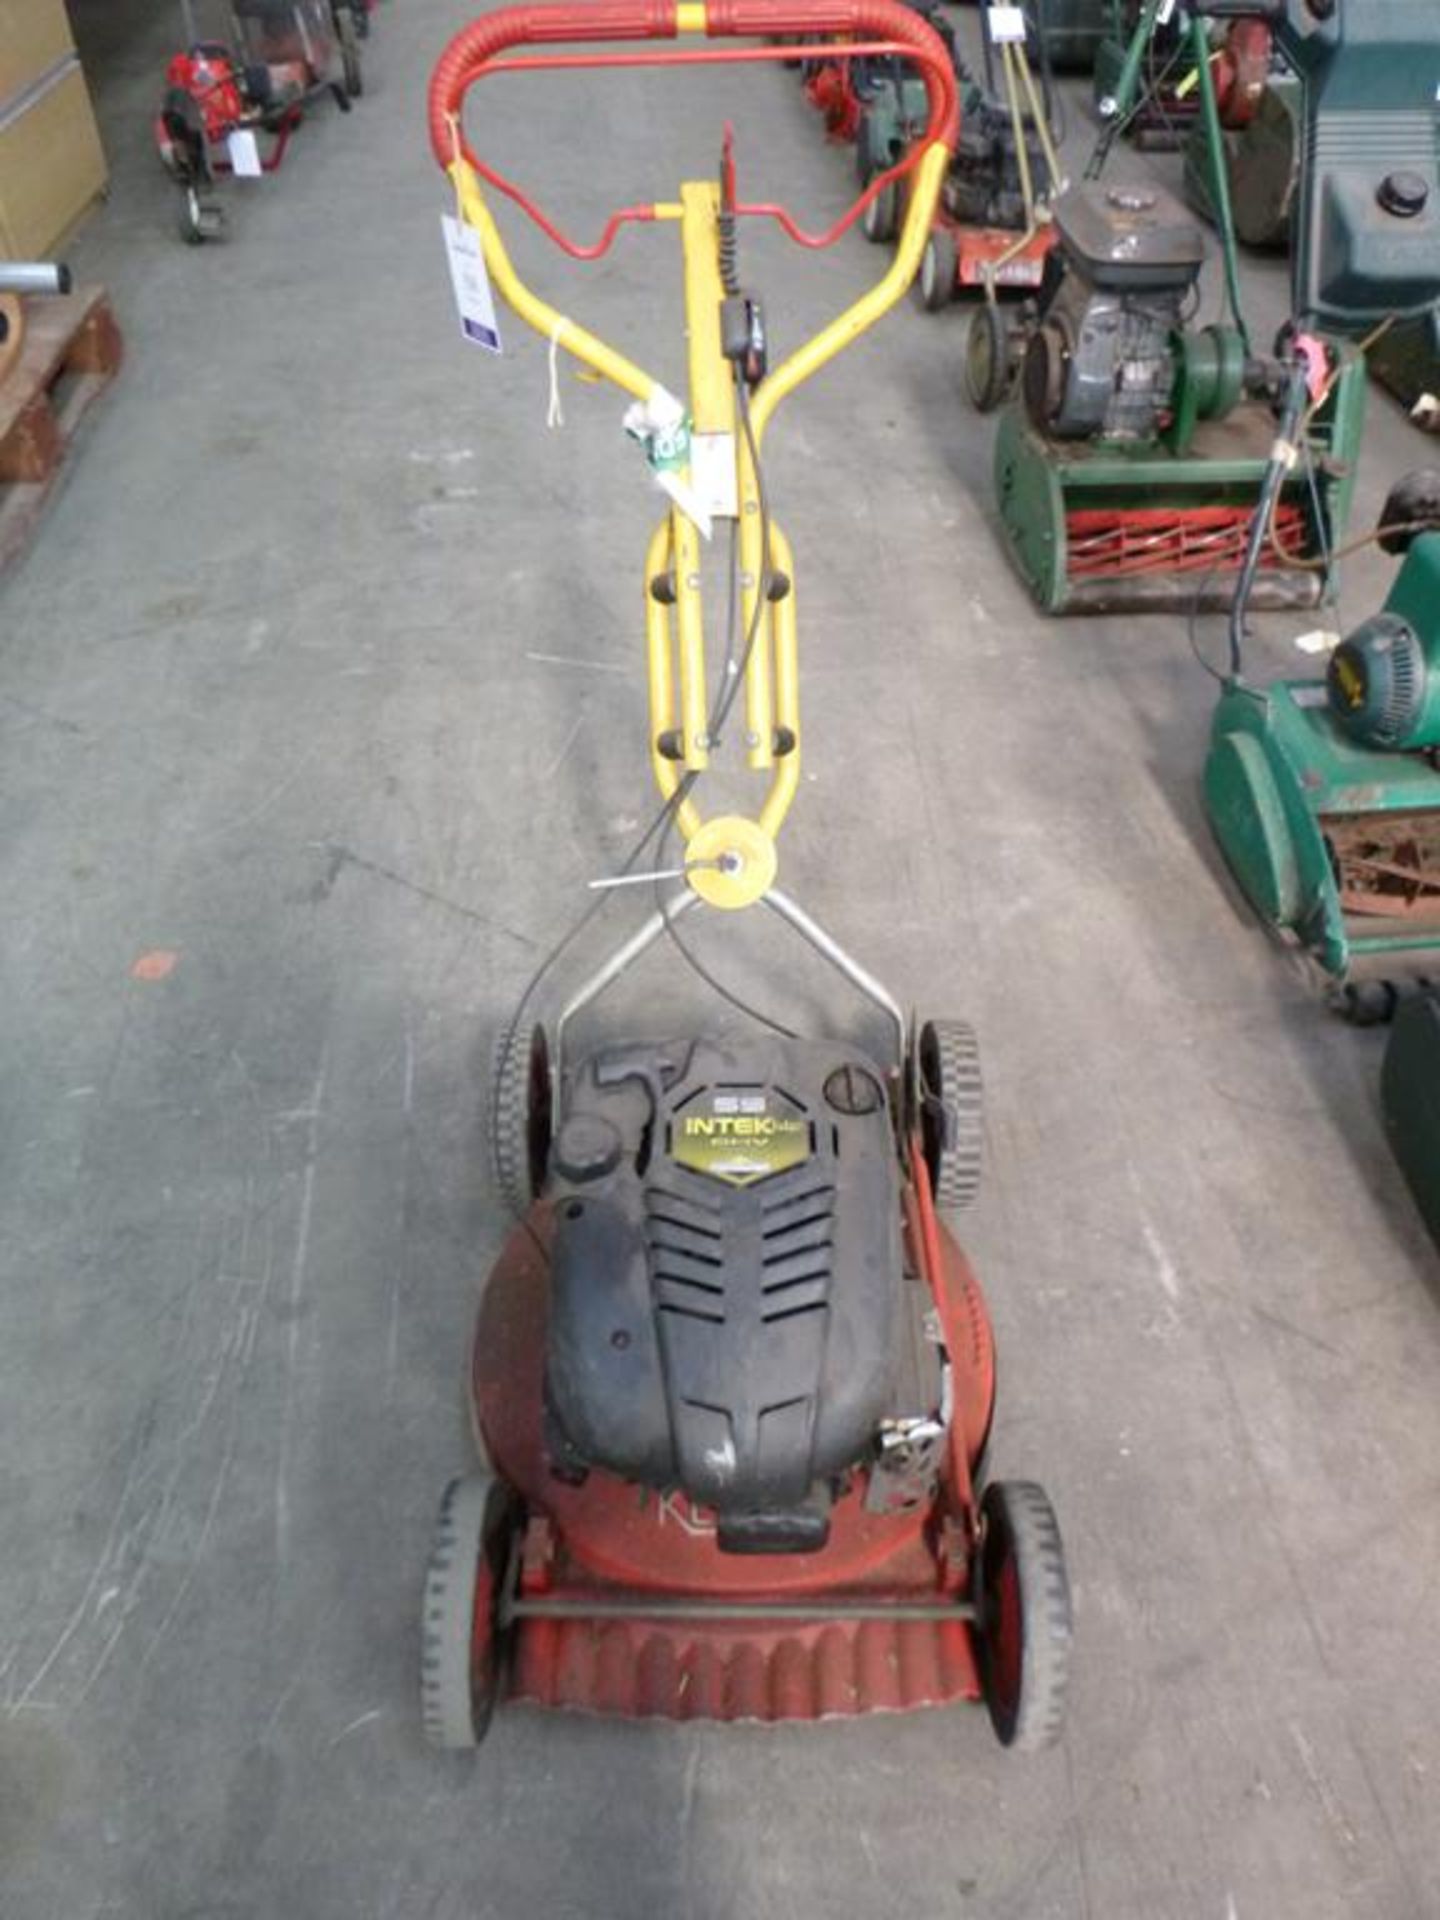 Trade In Kilippo Pro 4 OH Petrol Powered Briggs & Stratton 55 Intek Edge OHV Engine Lawnmower - Image 3 of 3